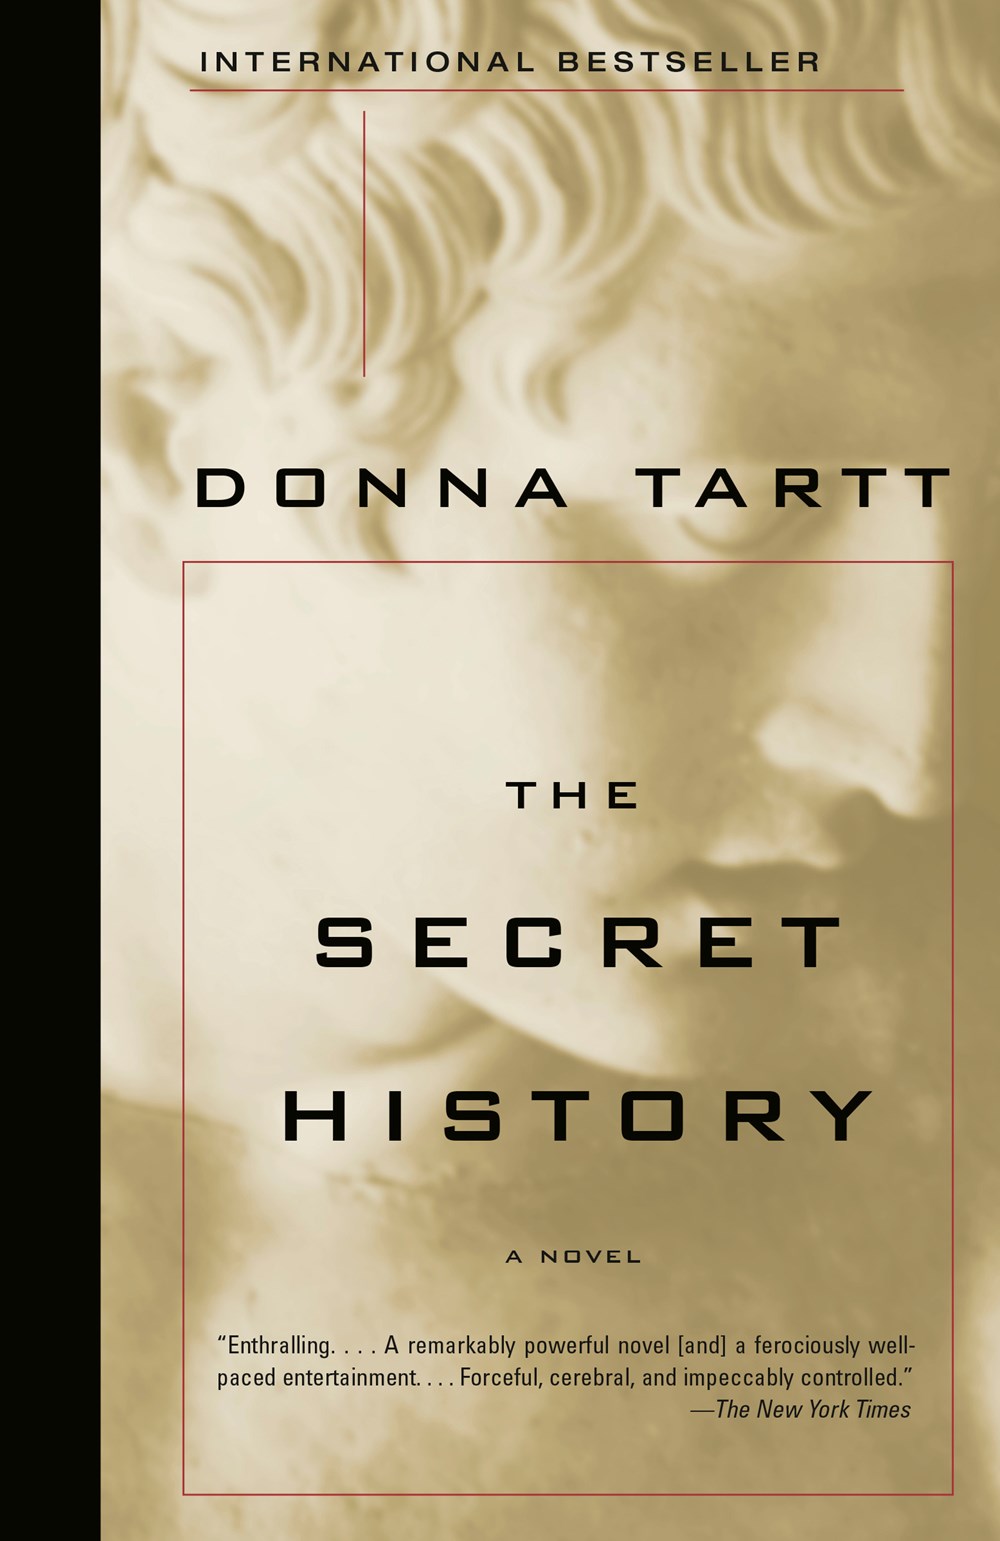 I Heart Donna Tartt: 10 Facts About Mysterious Author of 'The Goldfinch' -  Bookstr